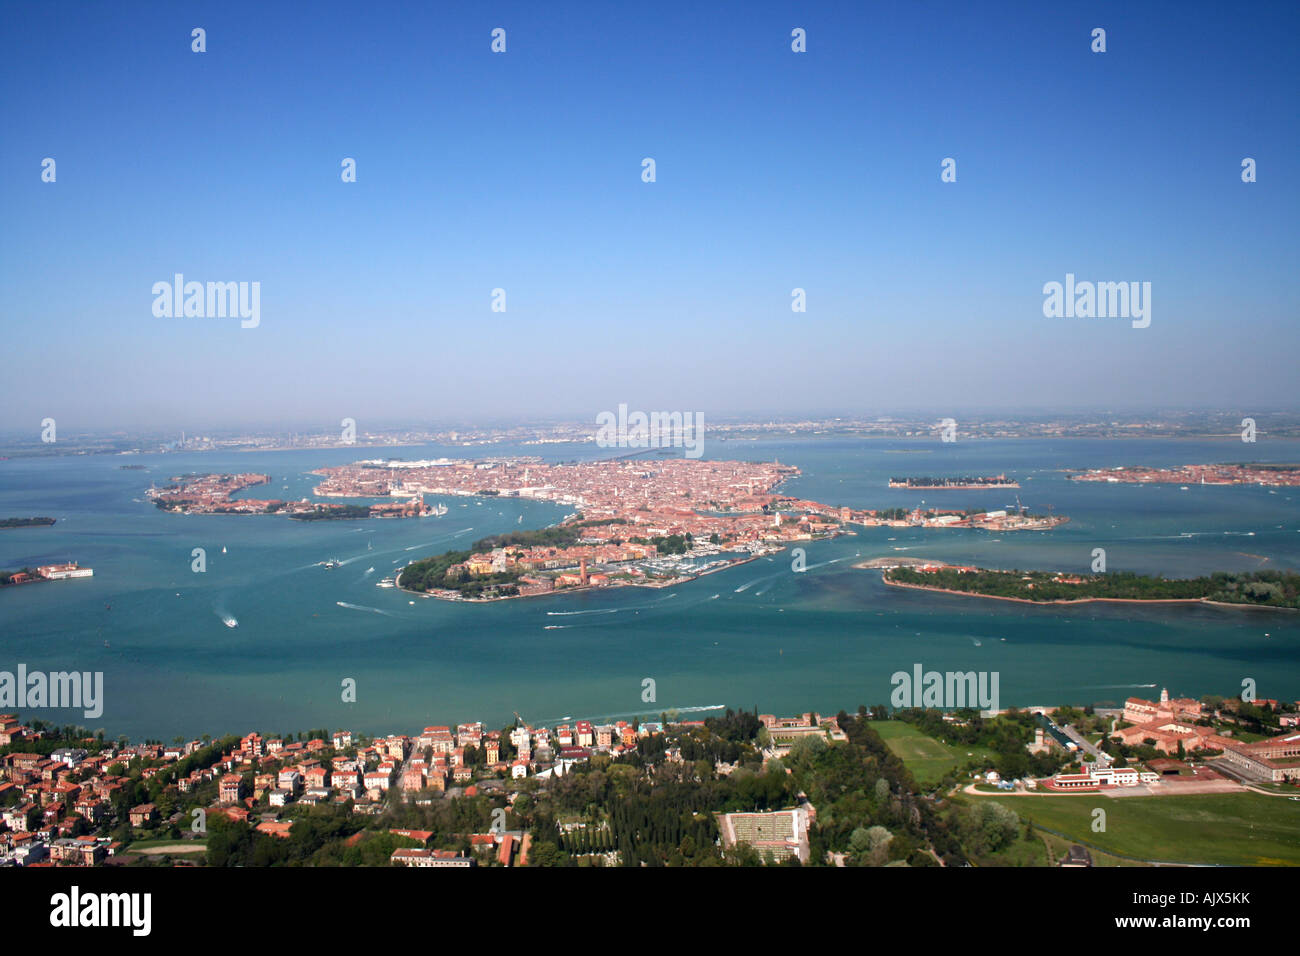 Venice Lido, the lagoon and Venice city seen from the air Stock Photo